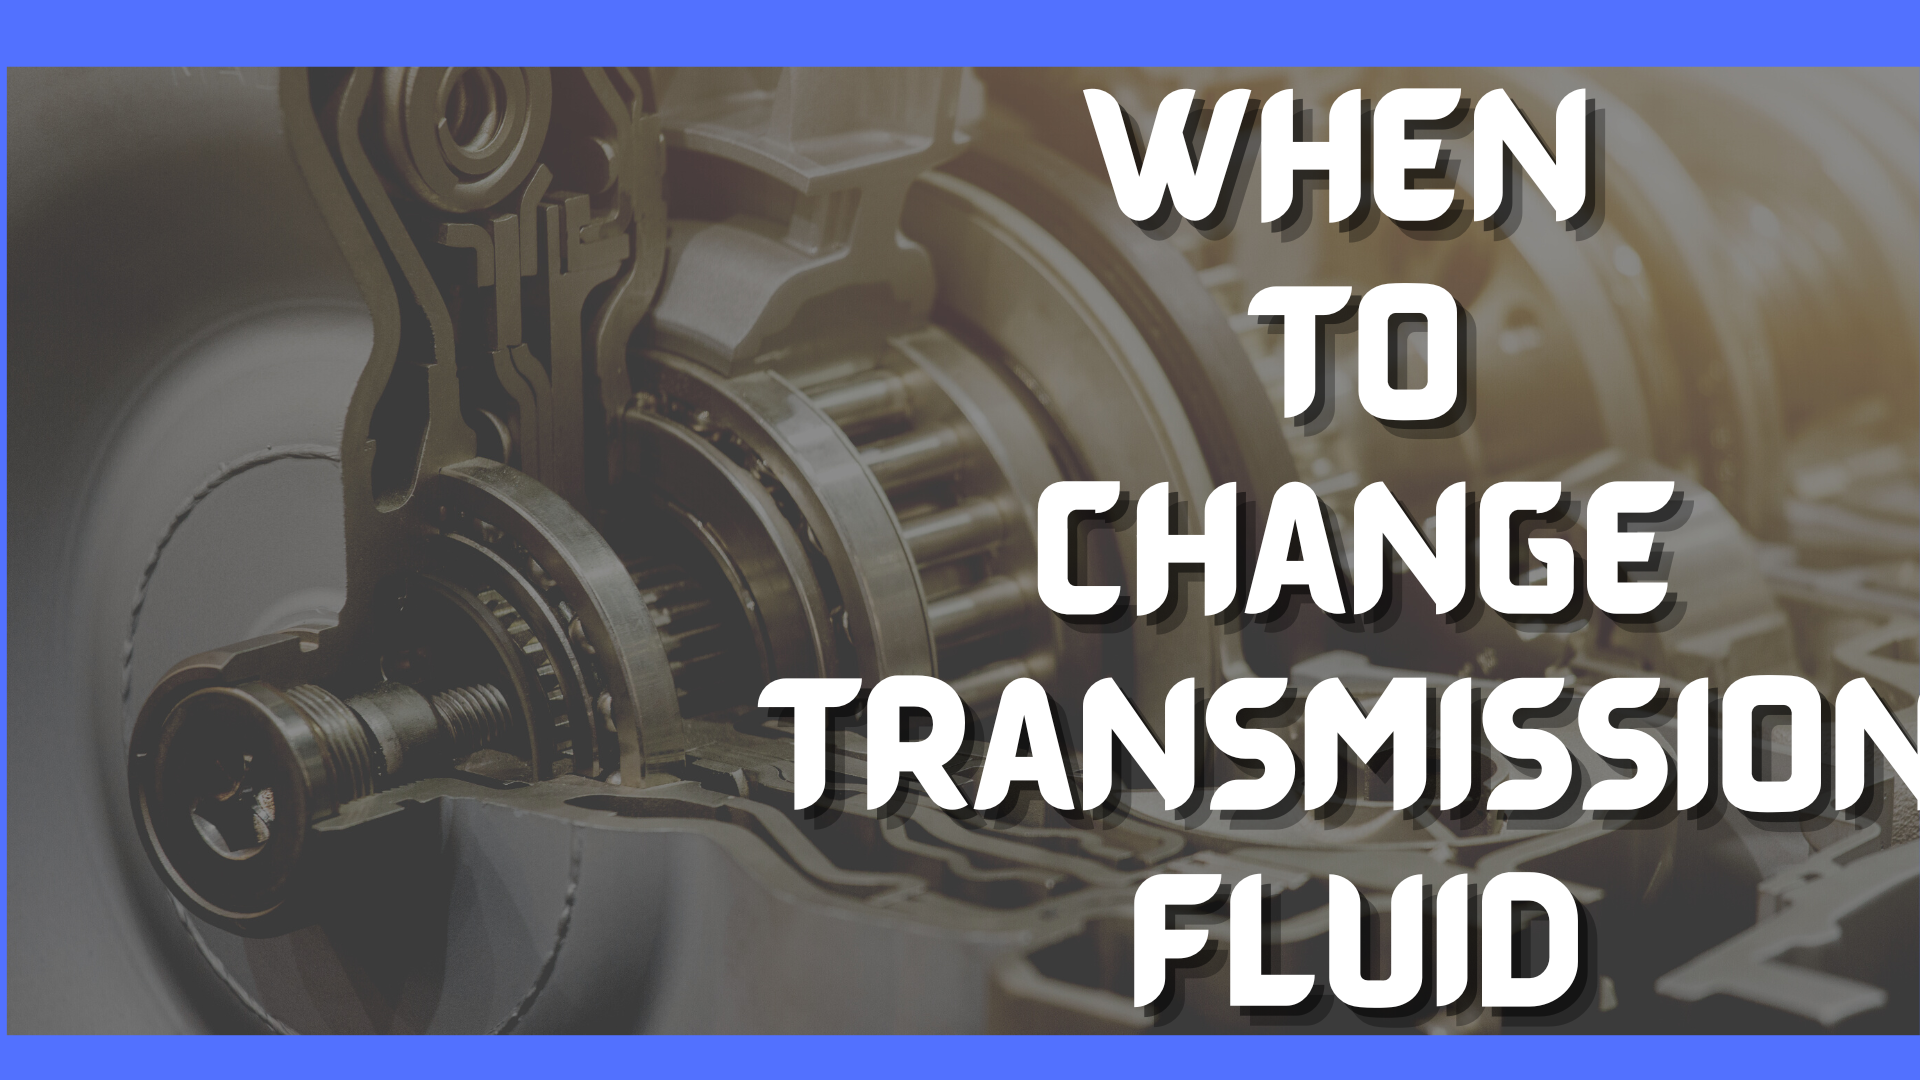 How Often Does Transmission Fluid Need To Be Changed?